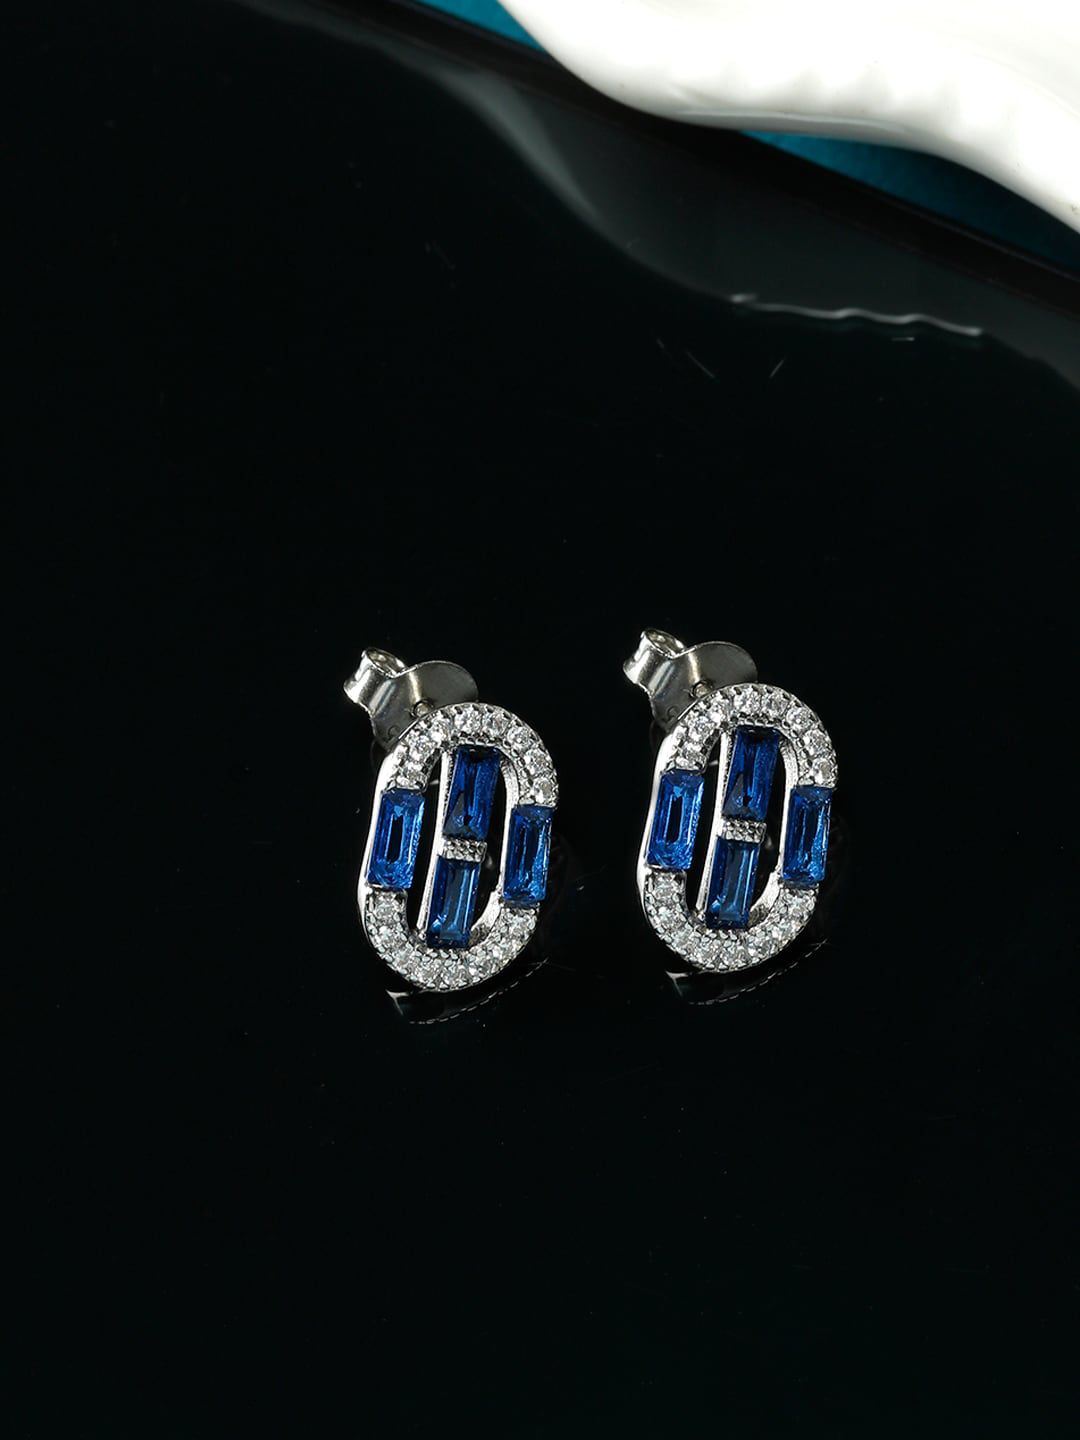 GIVA 925 Sterling Silver Silver-Toned & Navy Blue Contemporary Studs Earrings Price in India